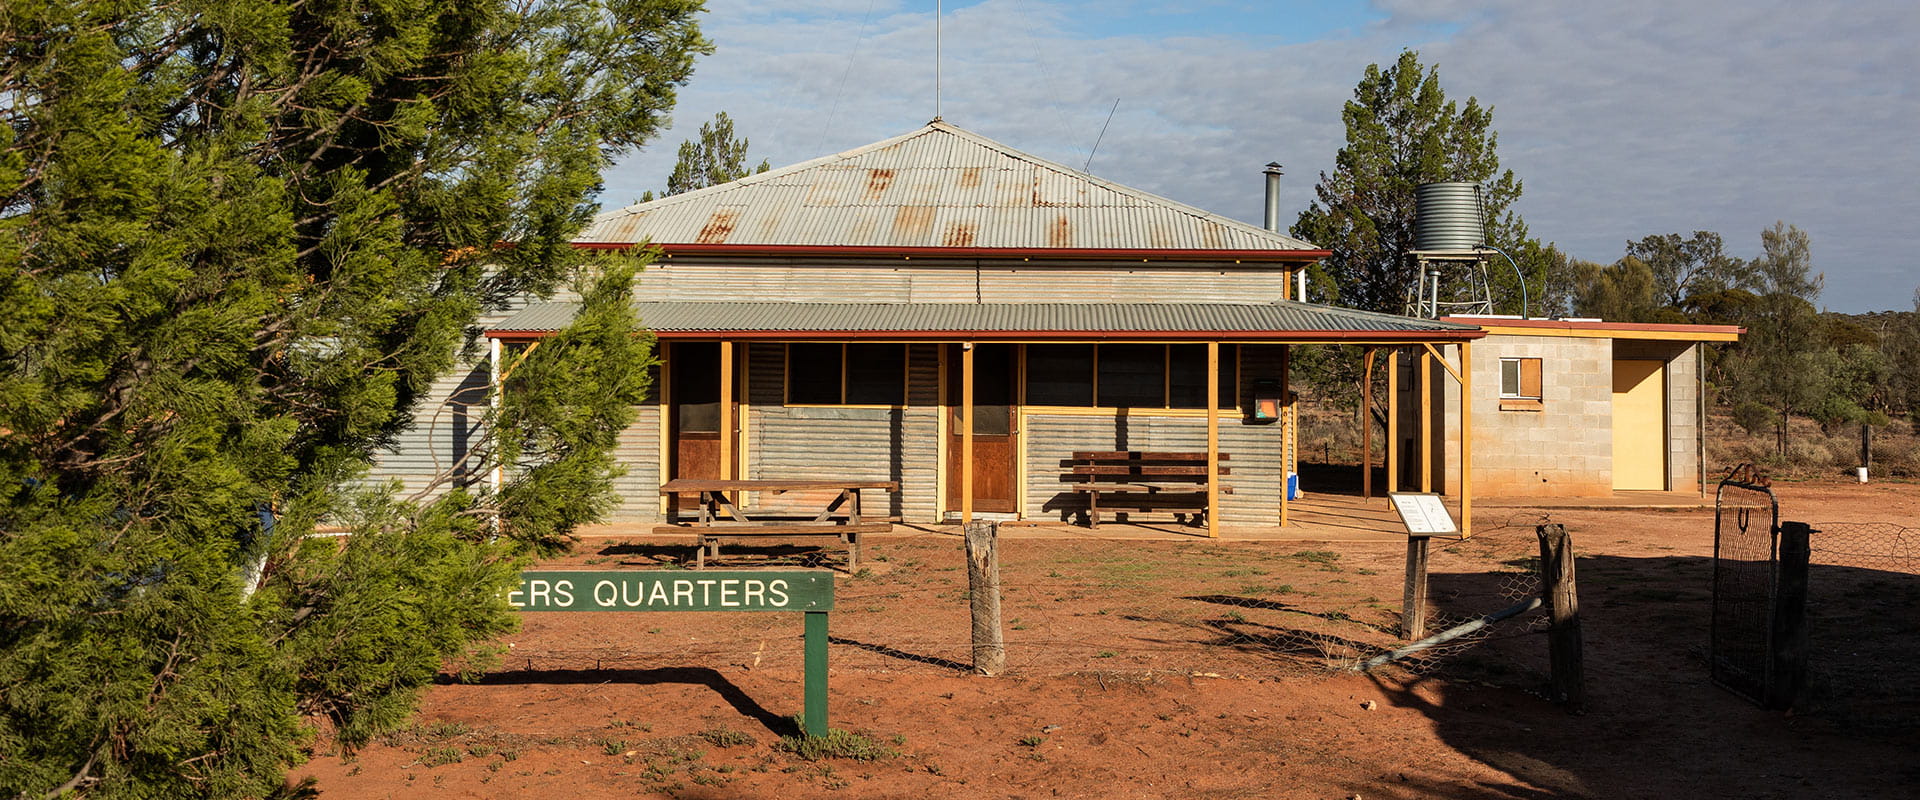 Shearers Quarters - an historic self-contained four bedroom cottage in the middle of the Murray Sunset National Park.